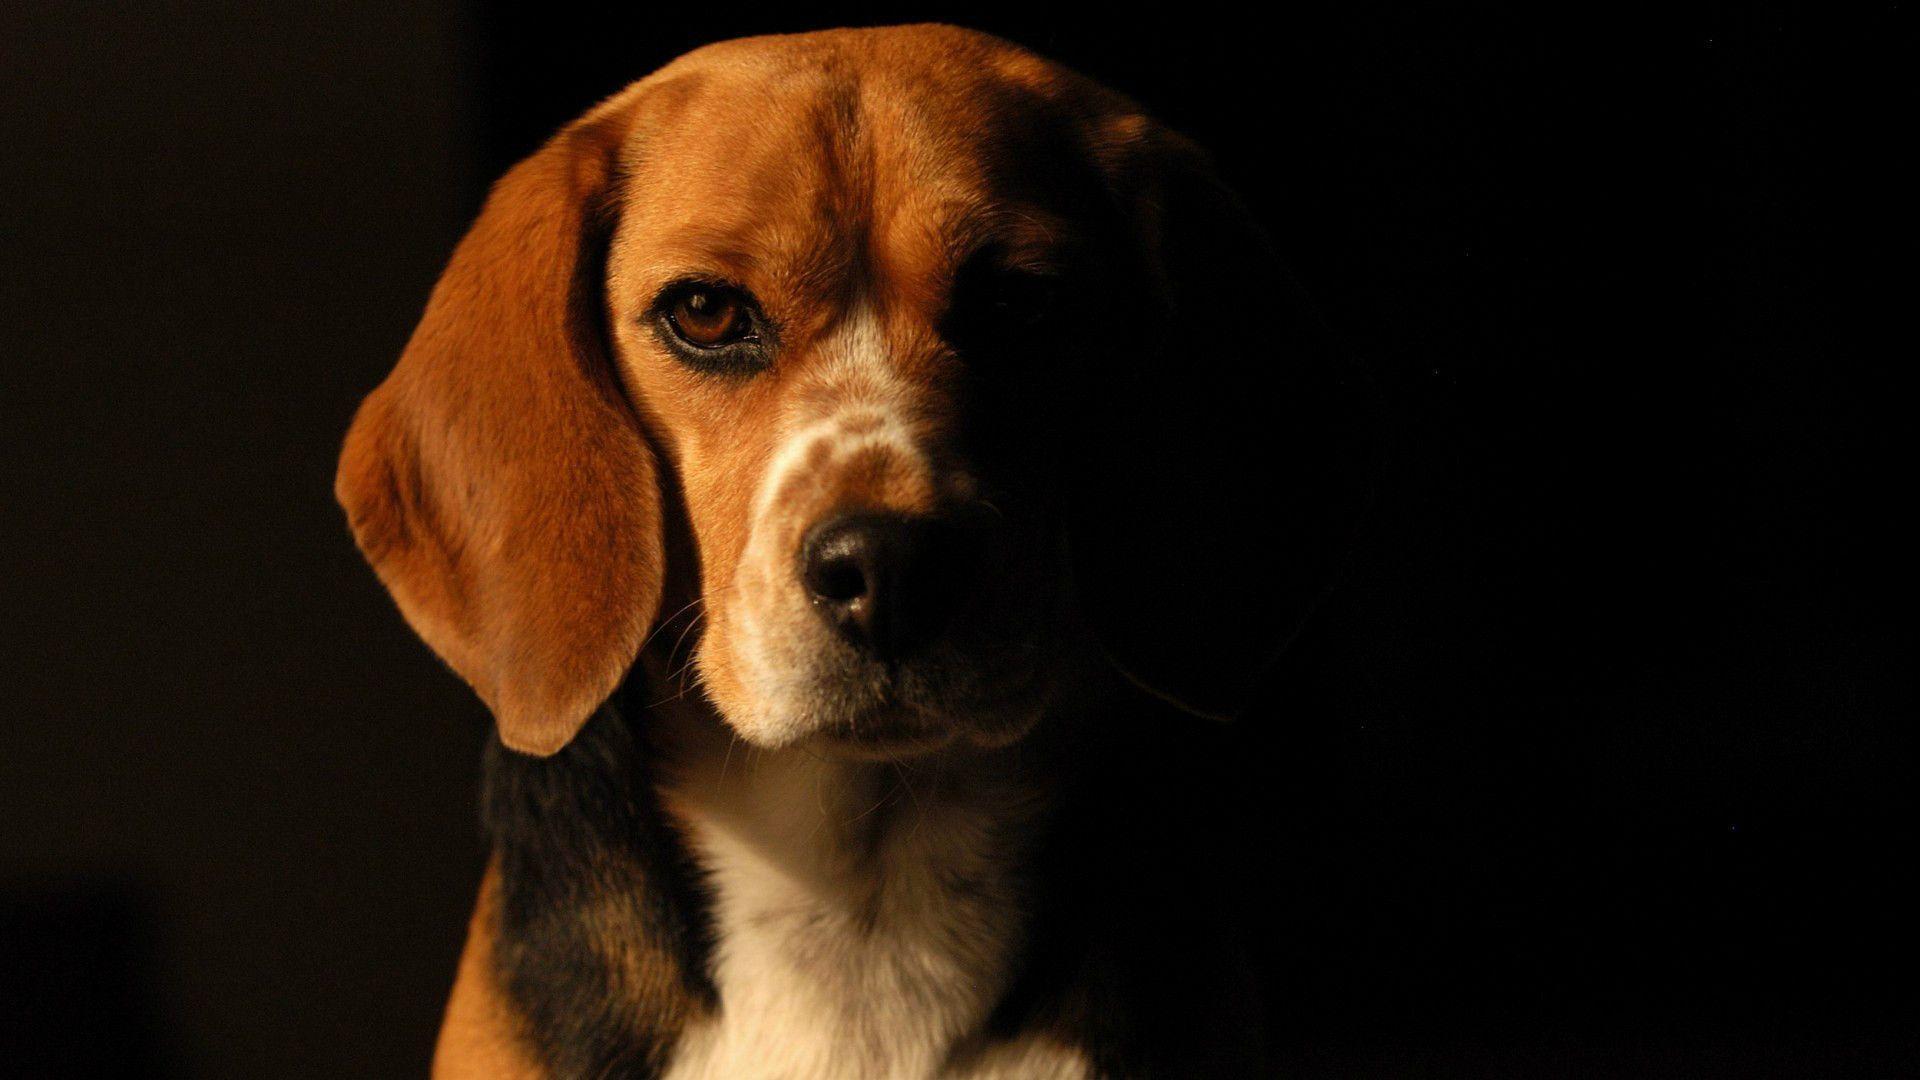 Beagle Wallpaper For Desktop Image In Collection